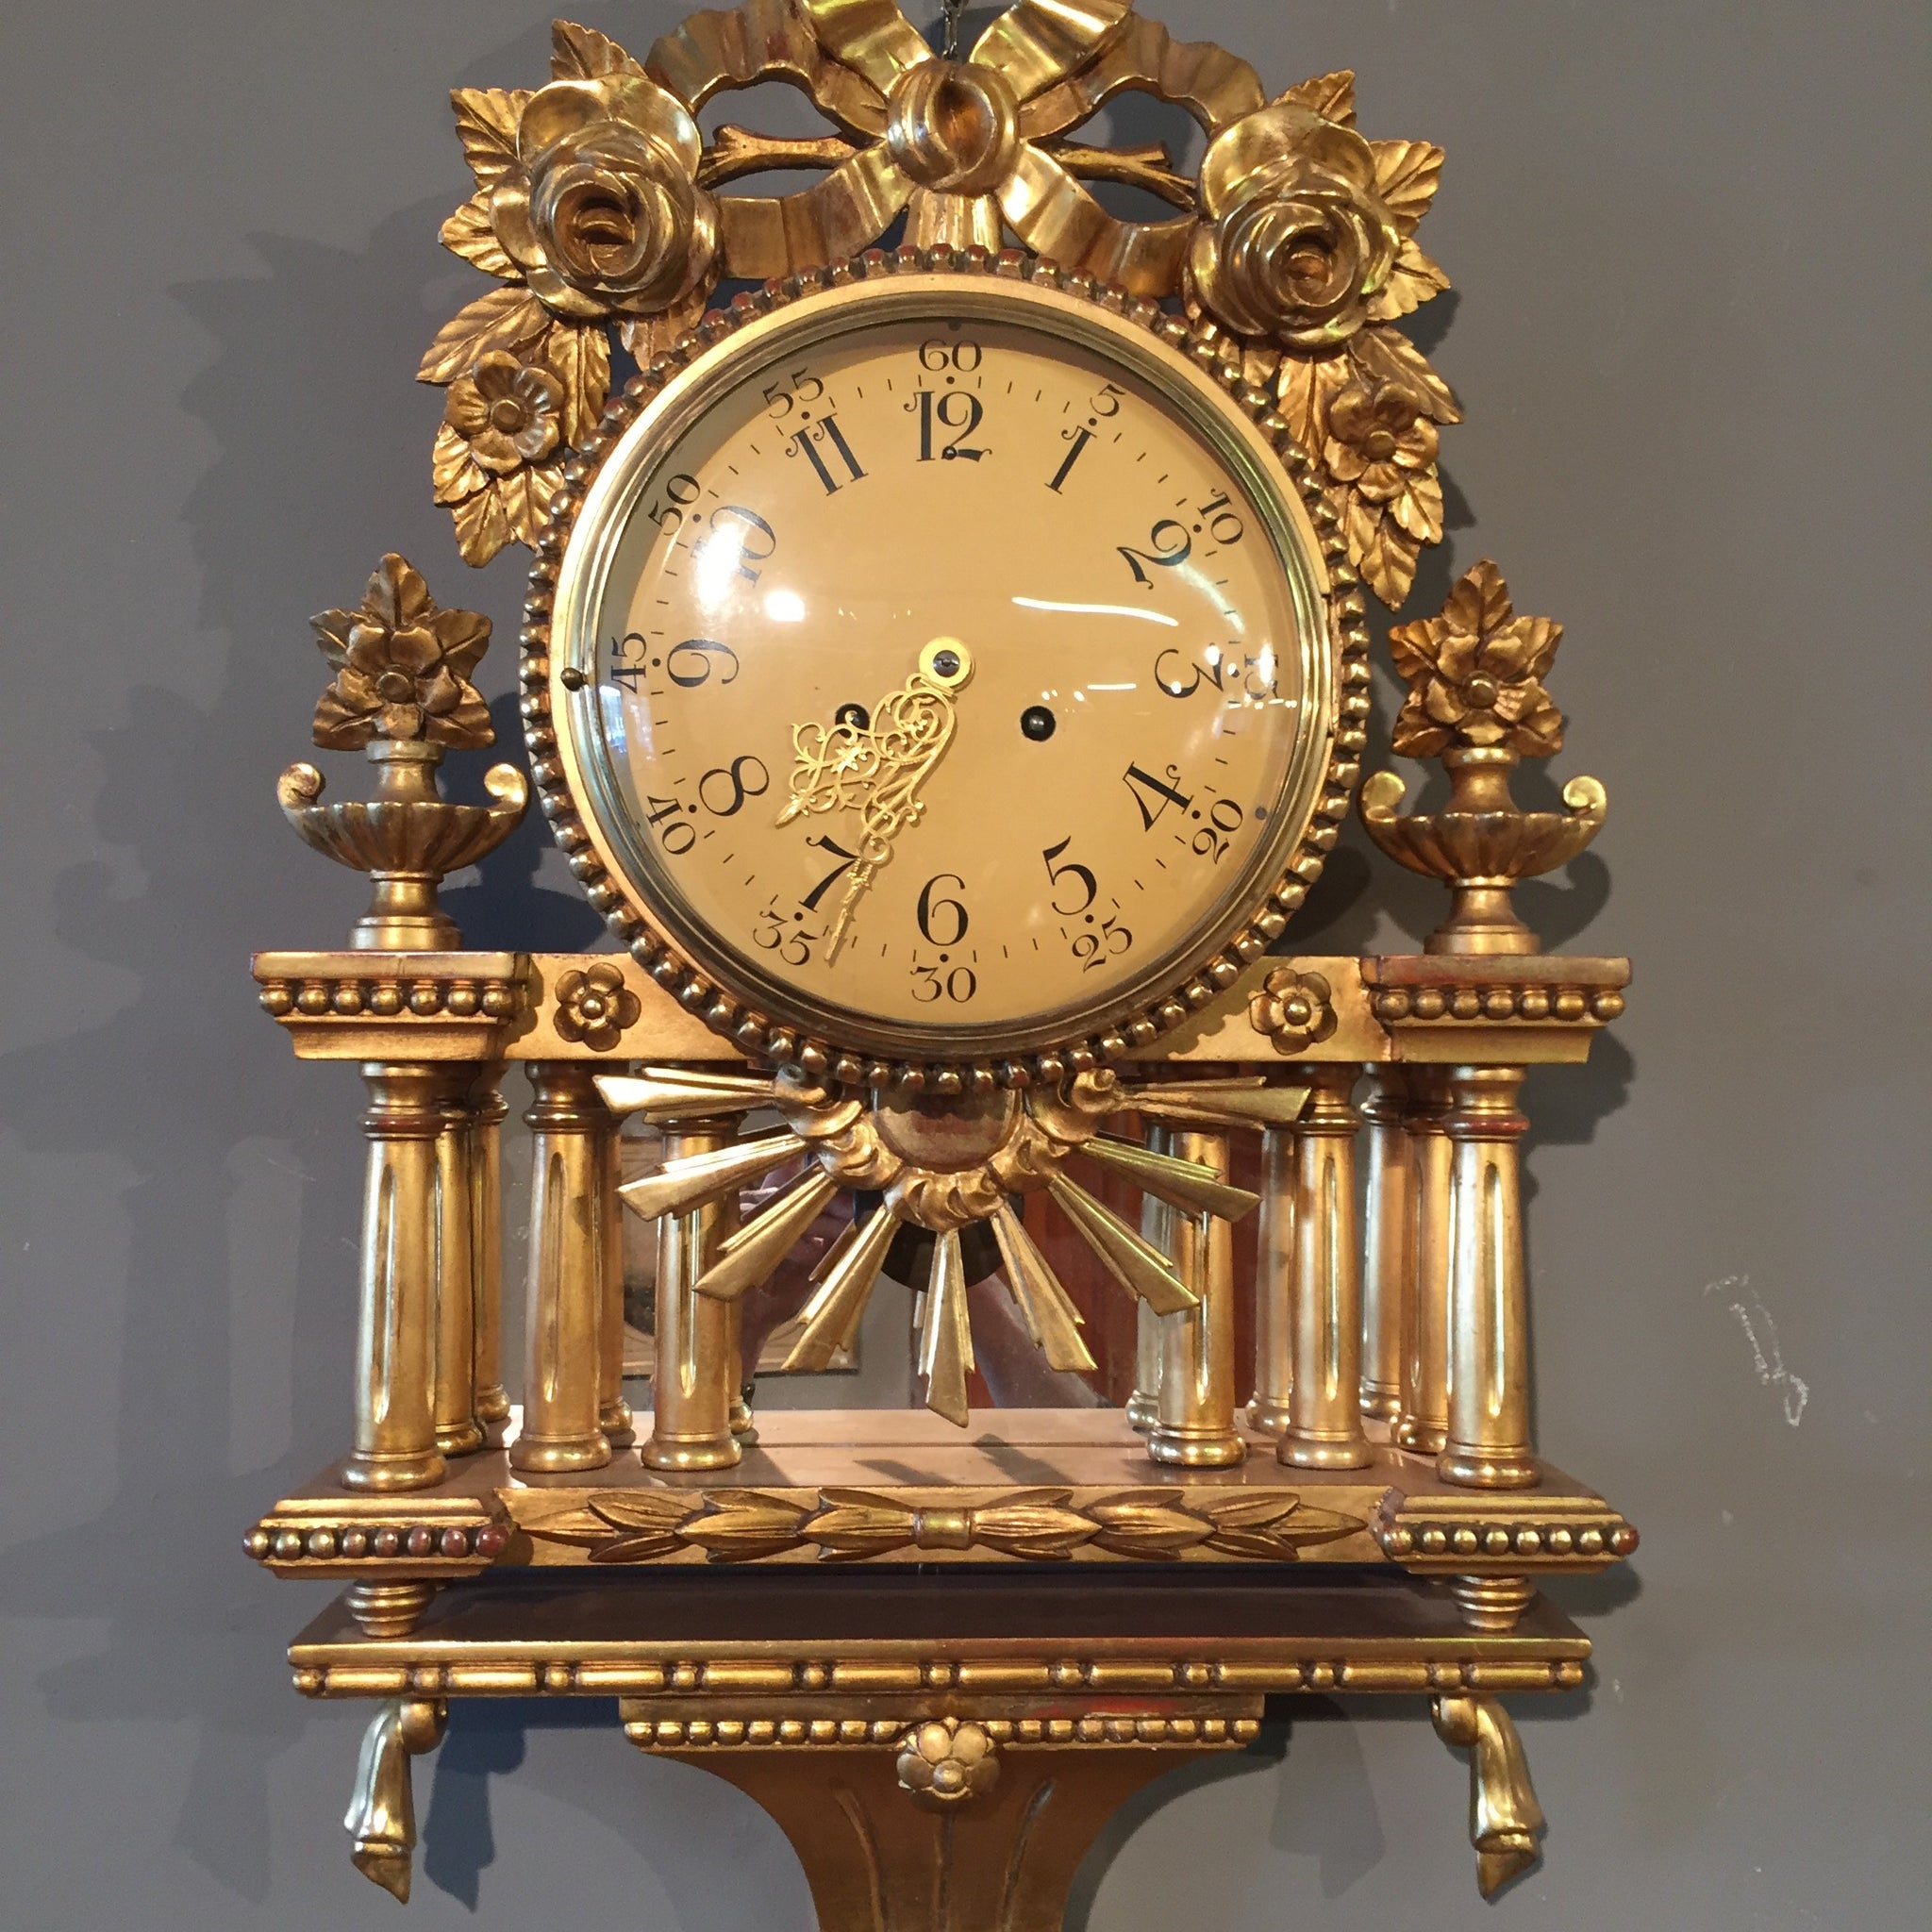 Antique wall clock from the early 1900s in carved gilded wood